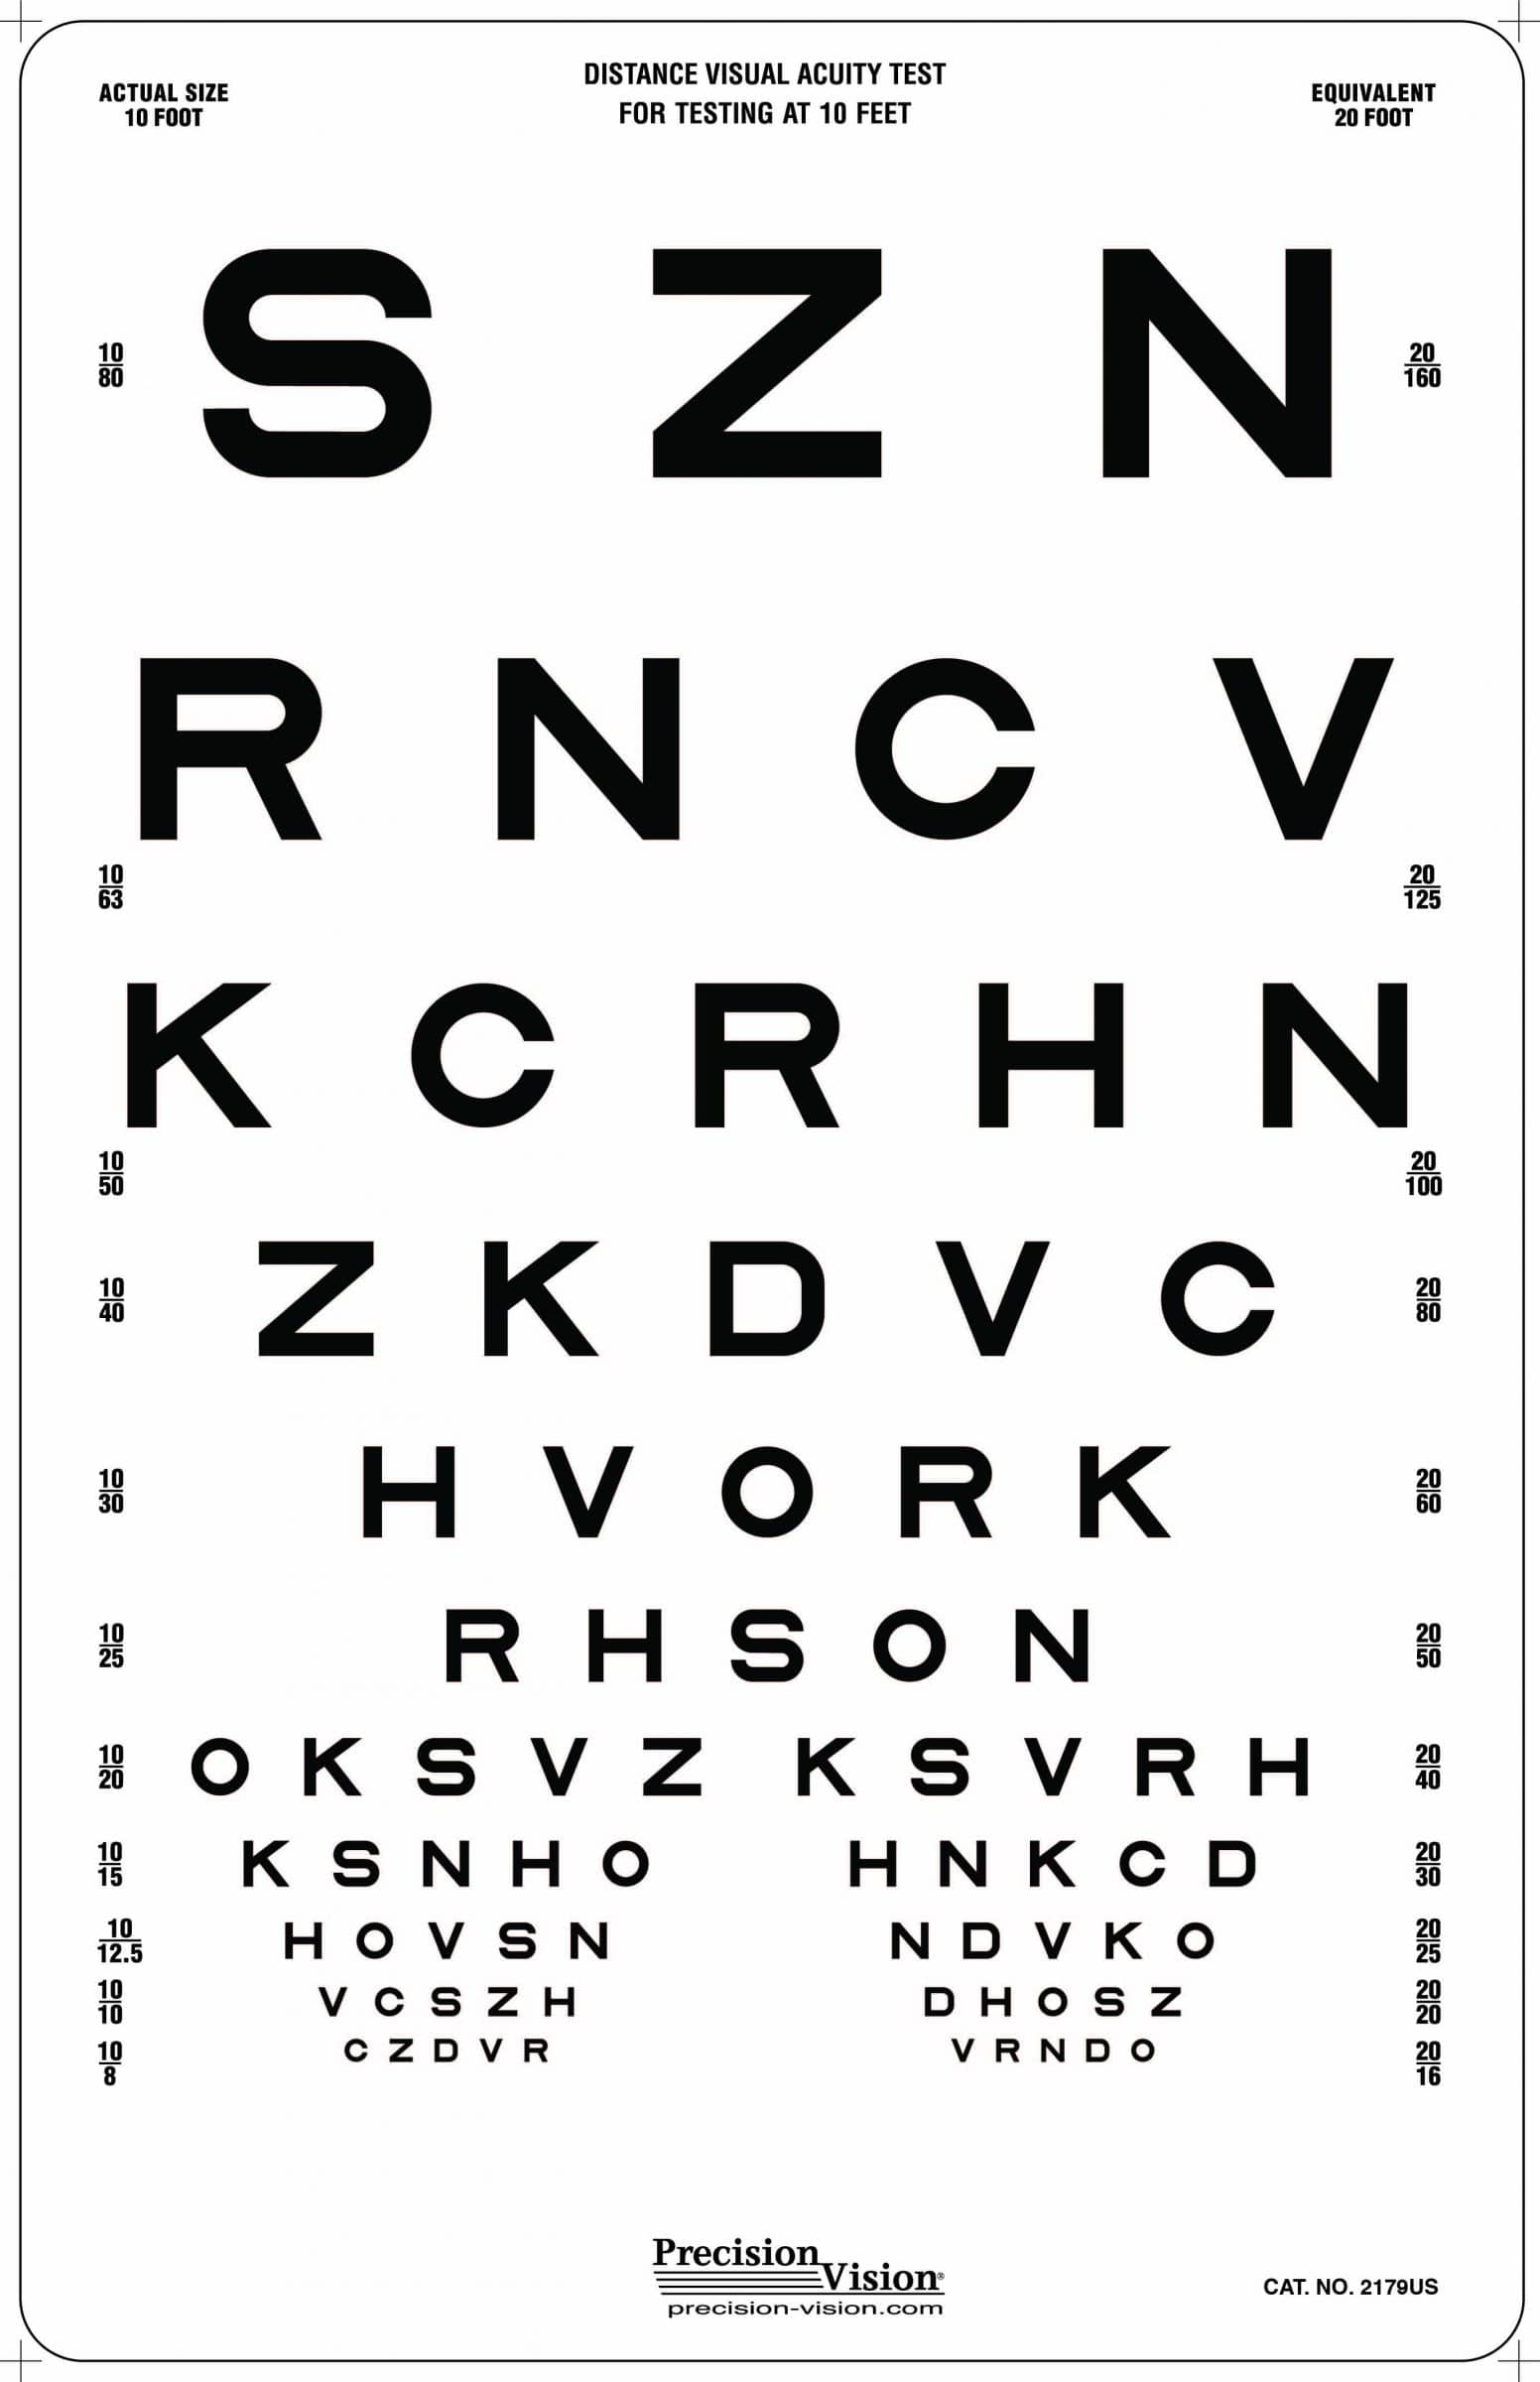 Snellen Chart for Mobile - Should be held at arm's